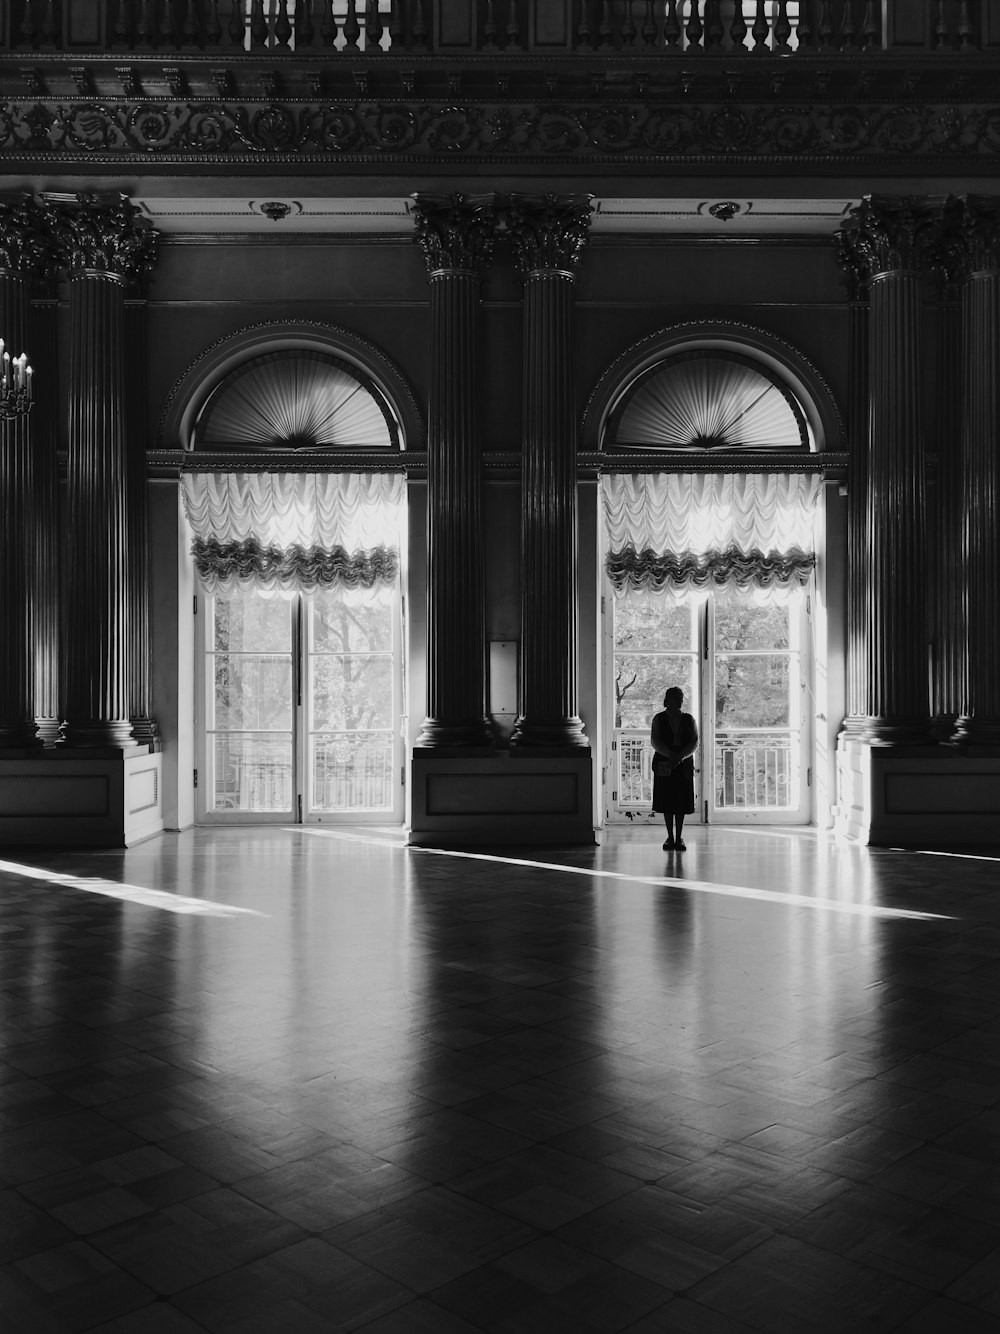 a black and white photo of a person standing in a large room